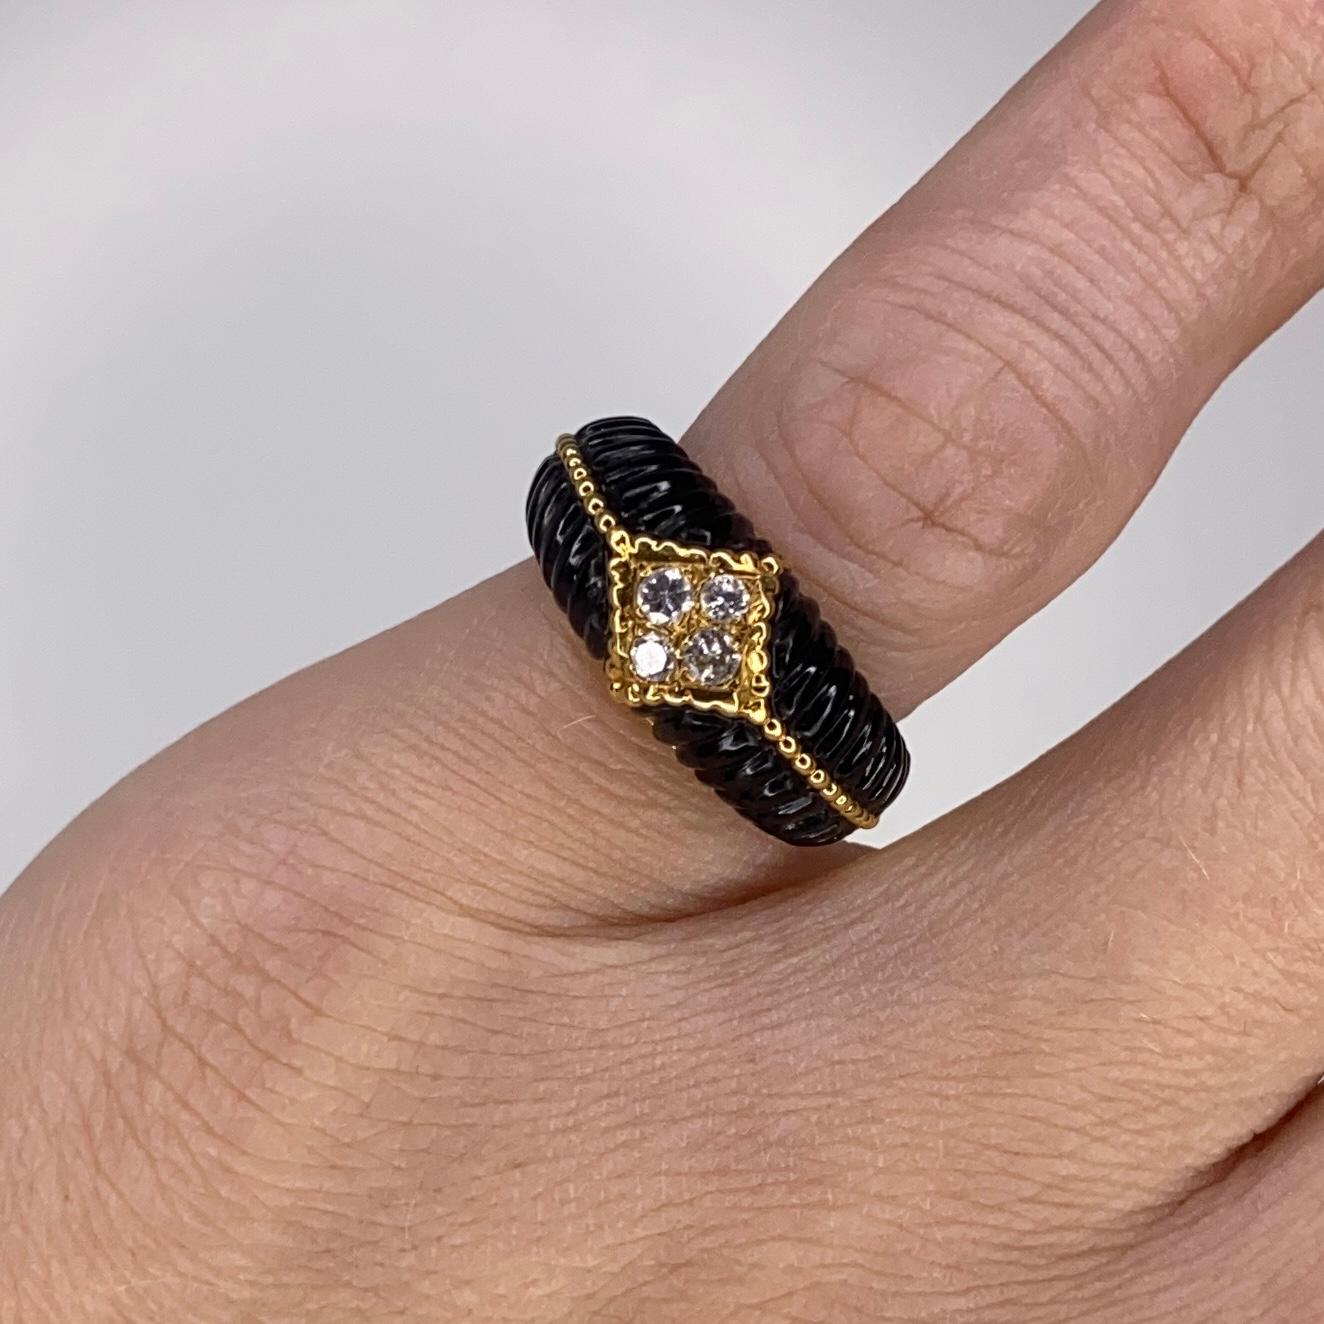 Women's Van Cleef & Arpels 1970 Paris Fluted Onyx Ring in 18Kt Yellow Gold with Diamonds For Sale